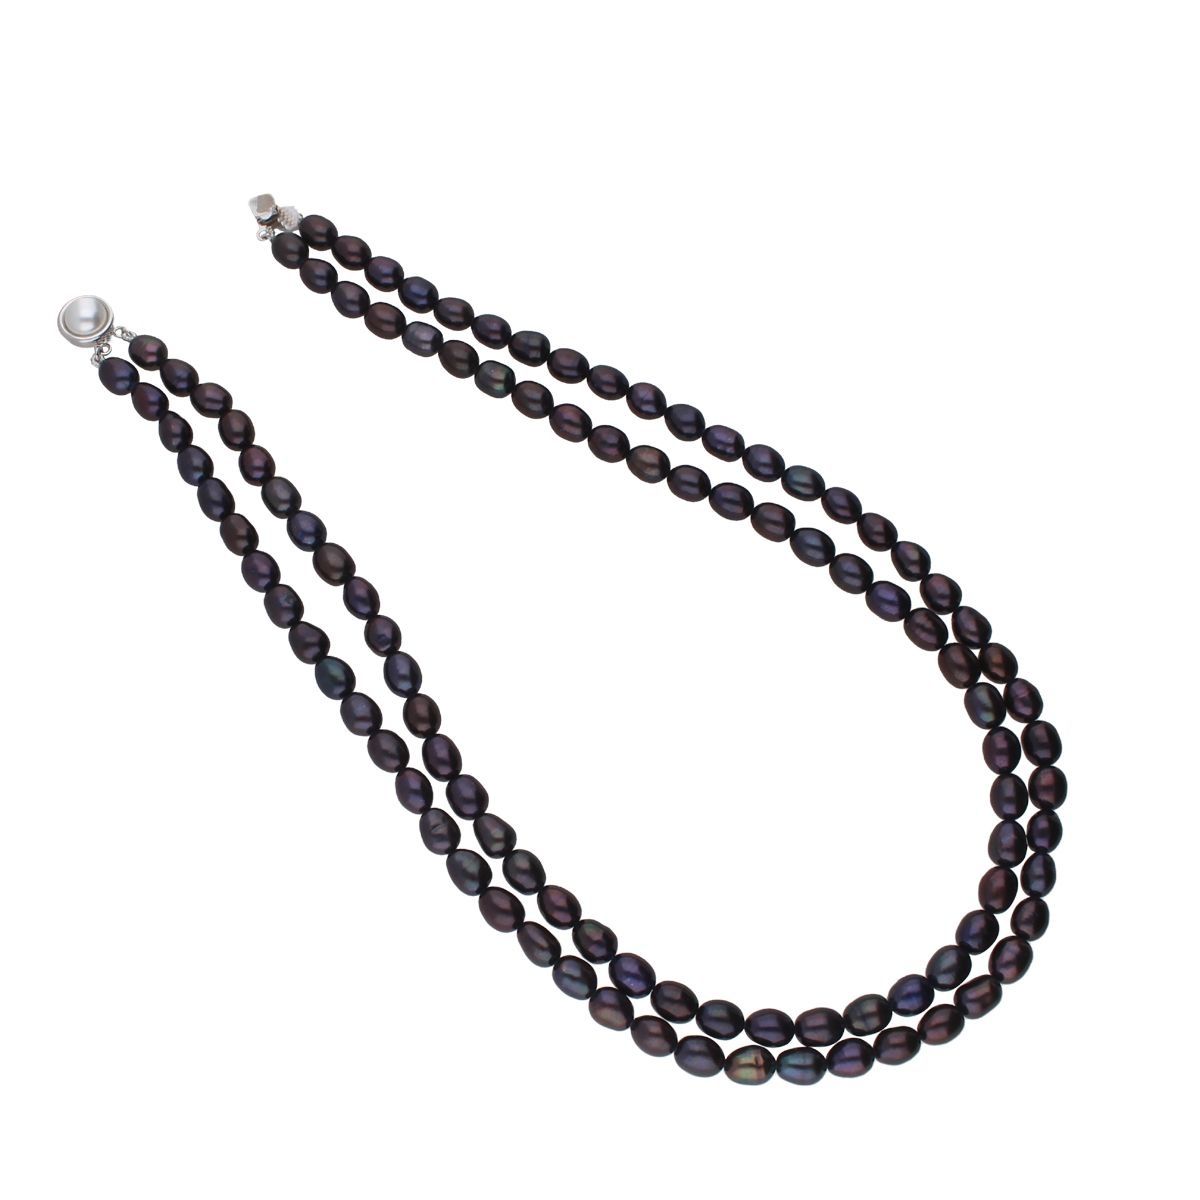 Black Pearl Necklaces for Sale: Online Auctions | Buy Black Pearl Necklaces